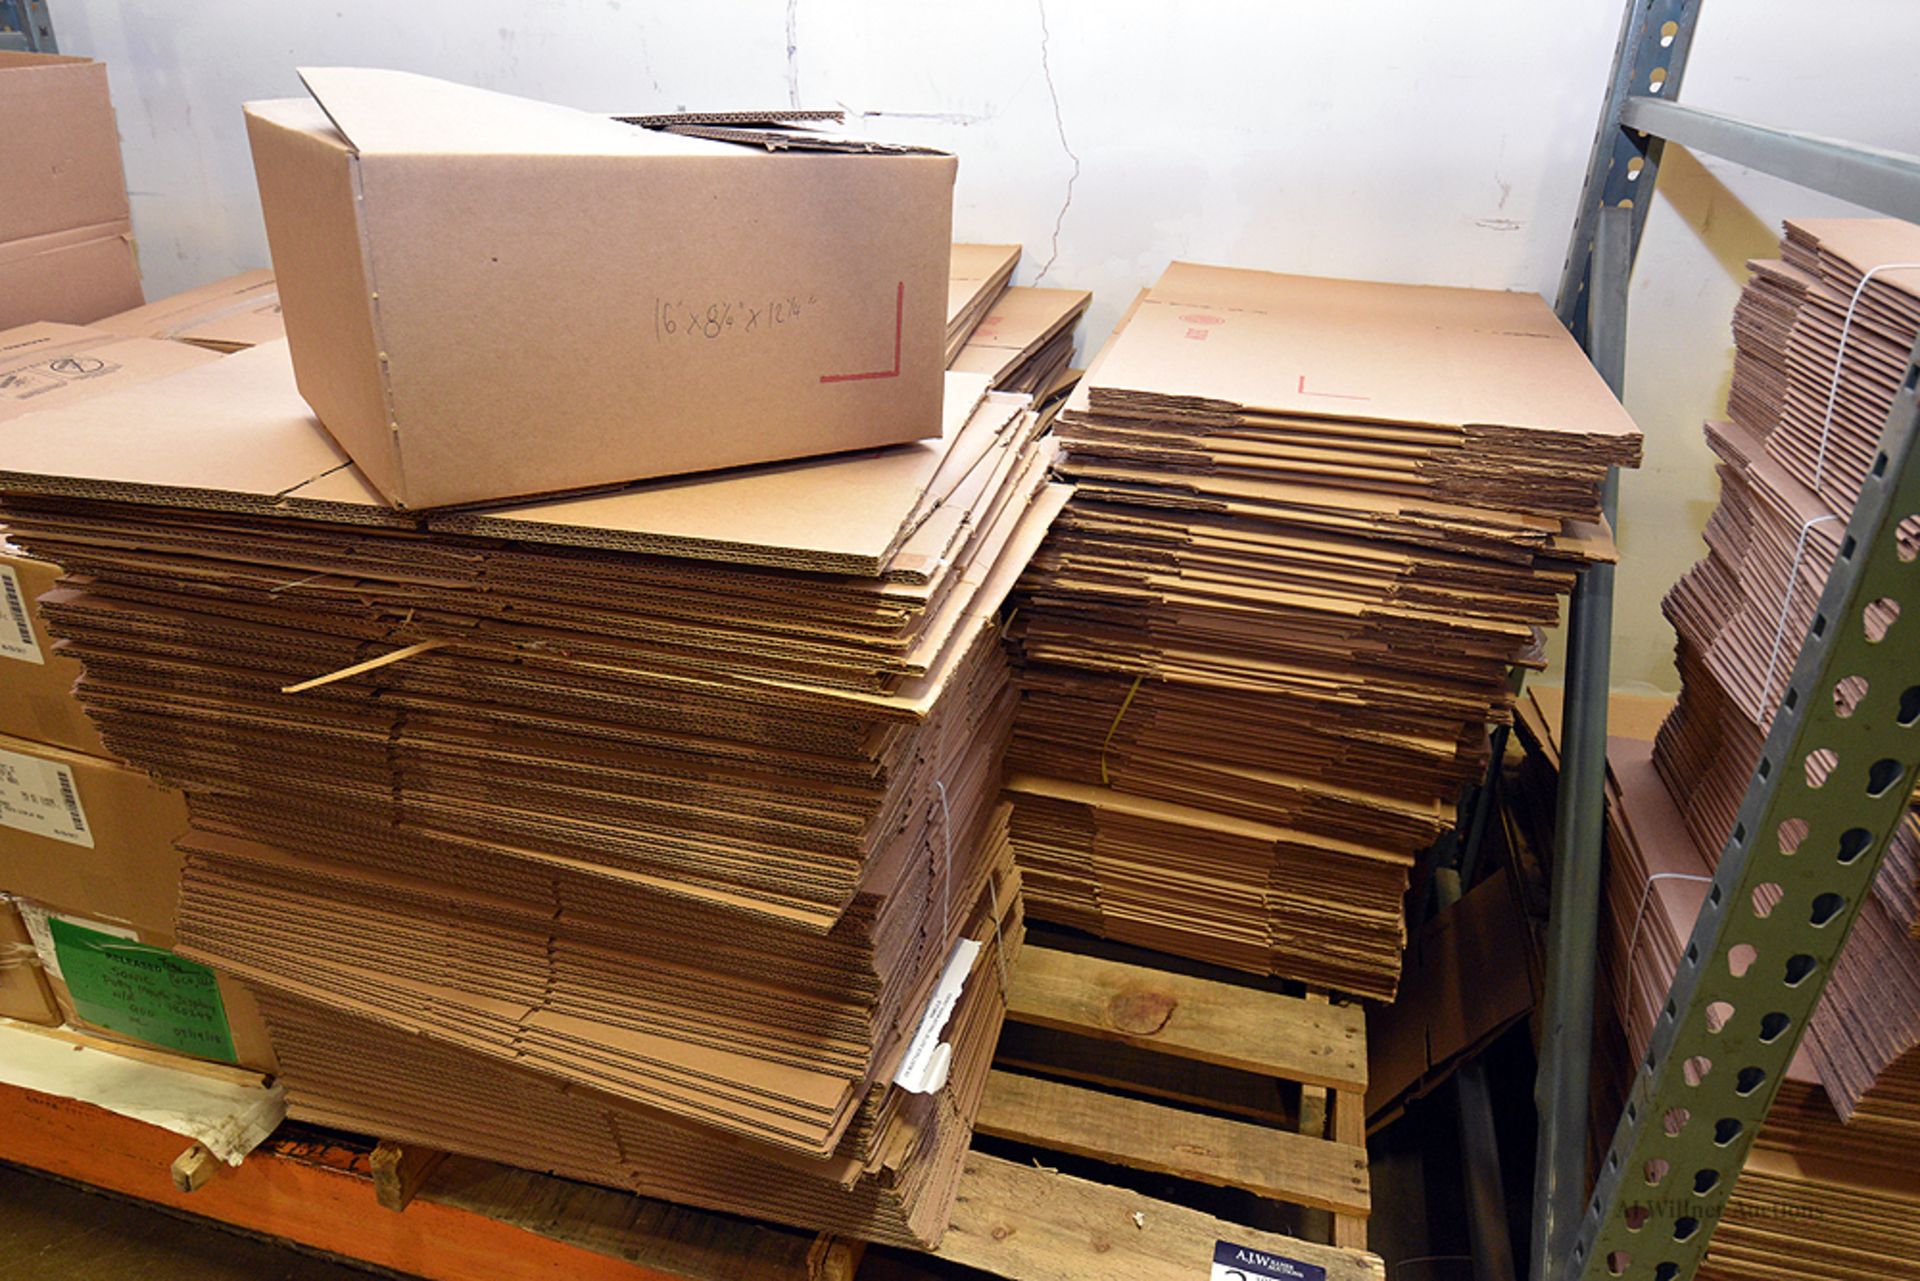 Pallet of Currugrated Cardboard Boxes 16"L 12-1/4"W 8-1/4"D - Image 2 of 2